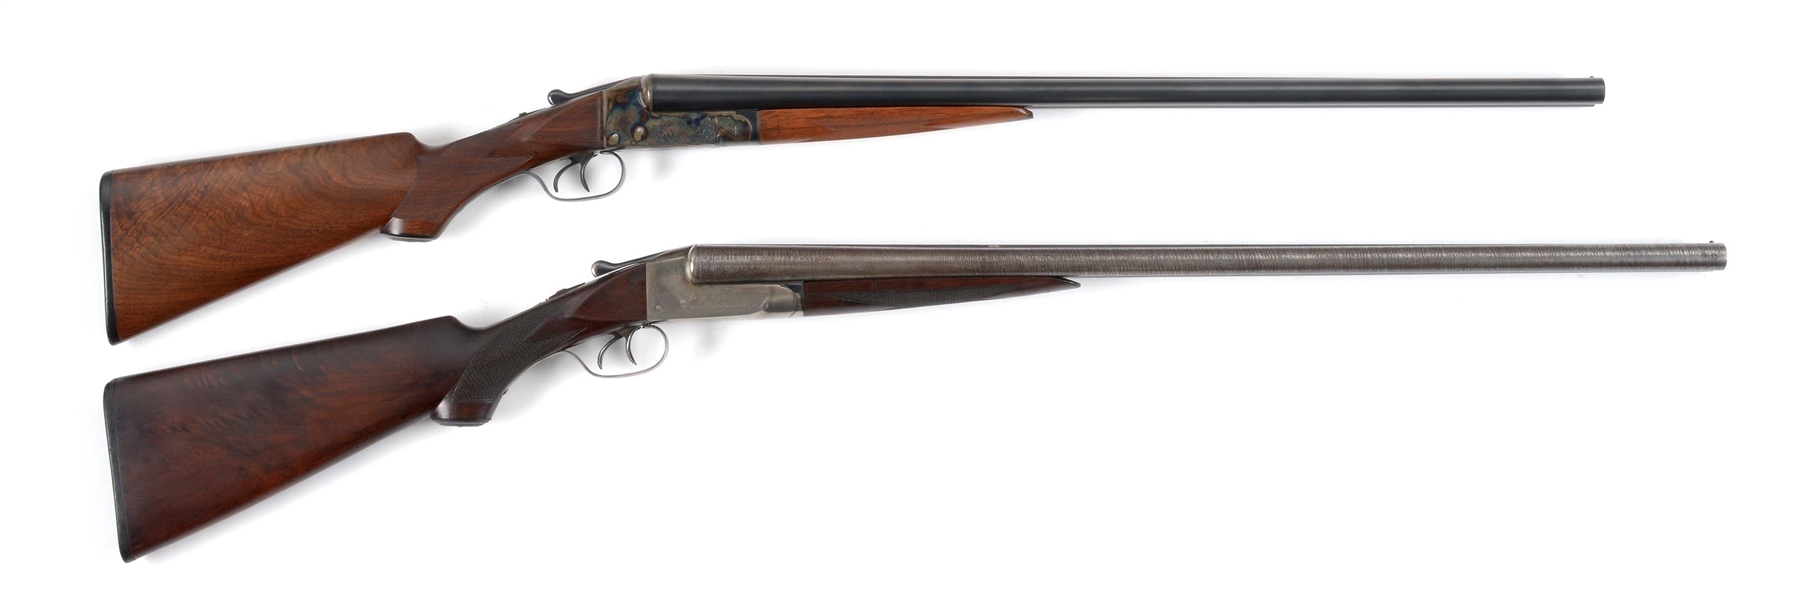 (C) LOT OF TWO: TWO ITHACA FLUES SIDE BY SIDE SHOTGUNS.